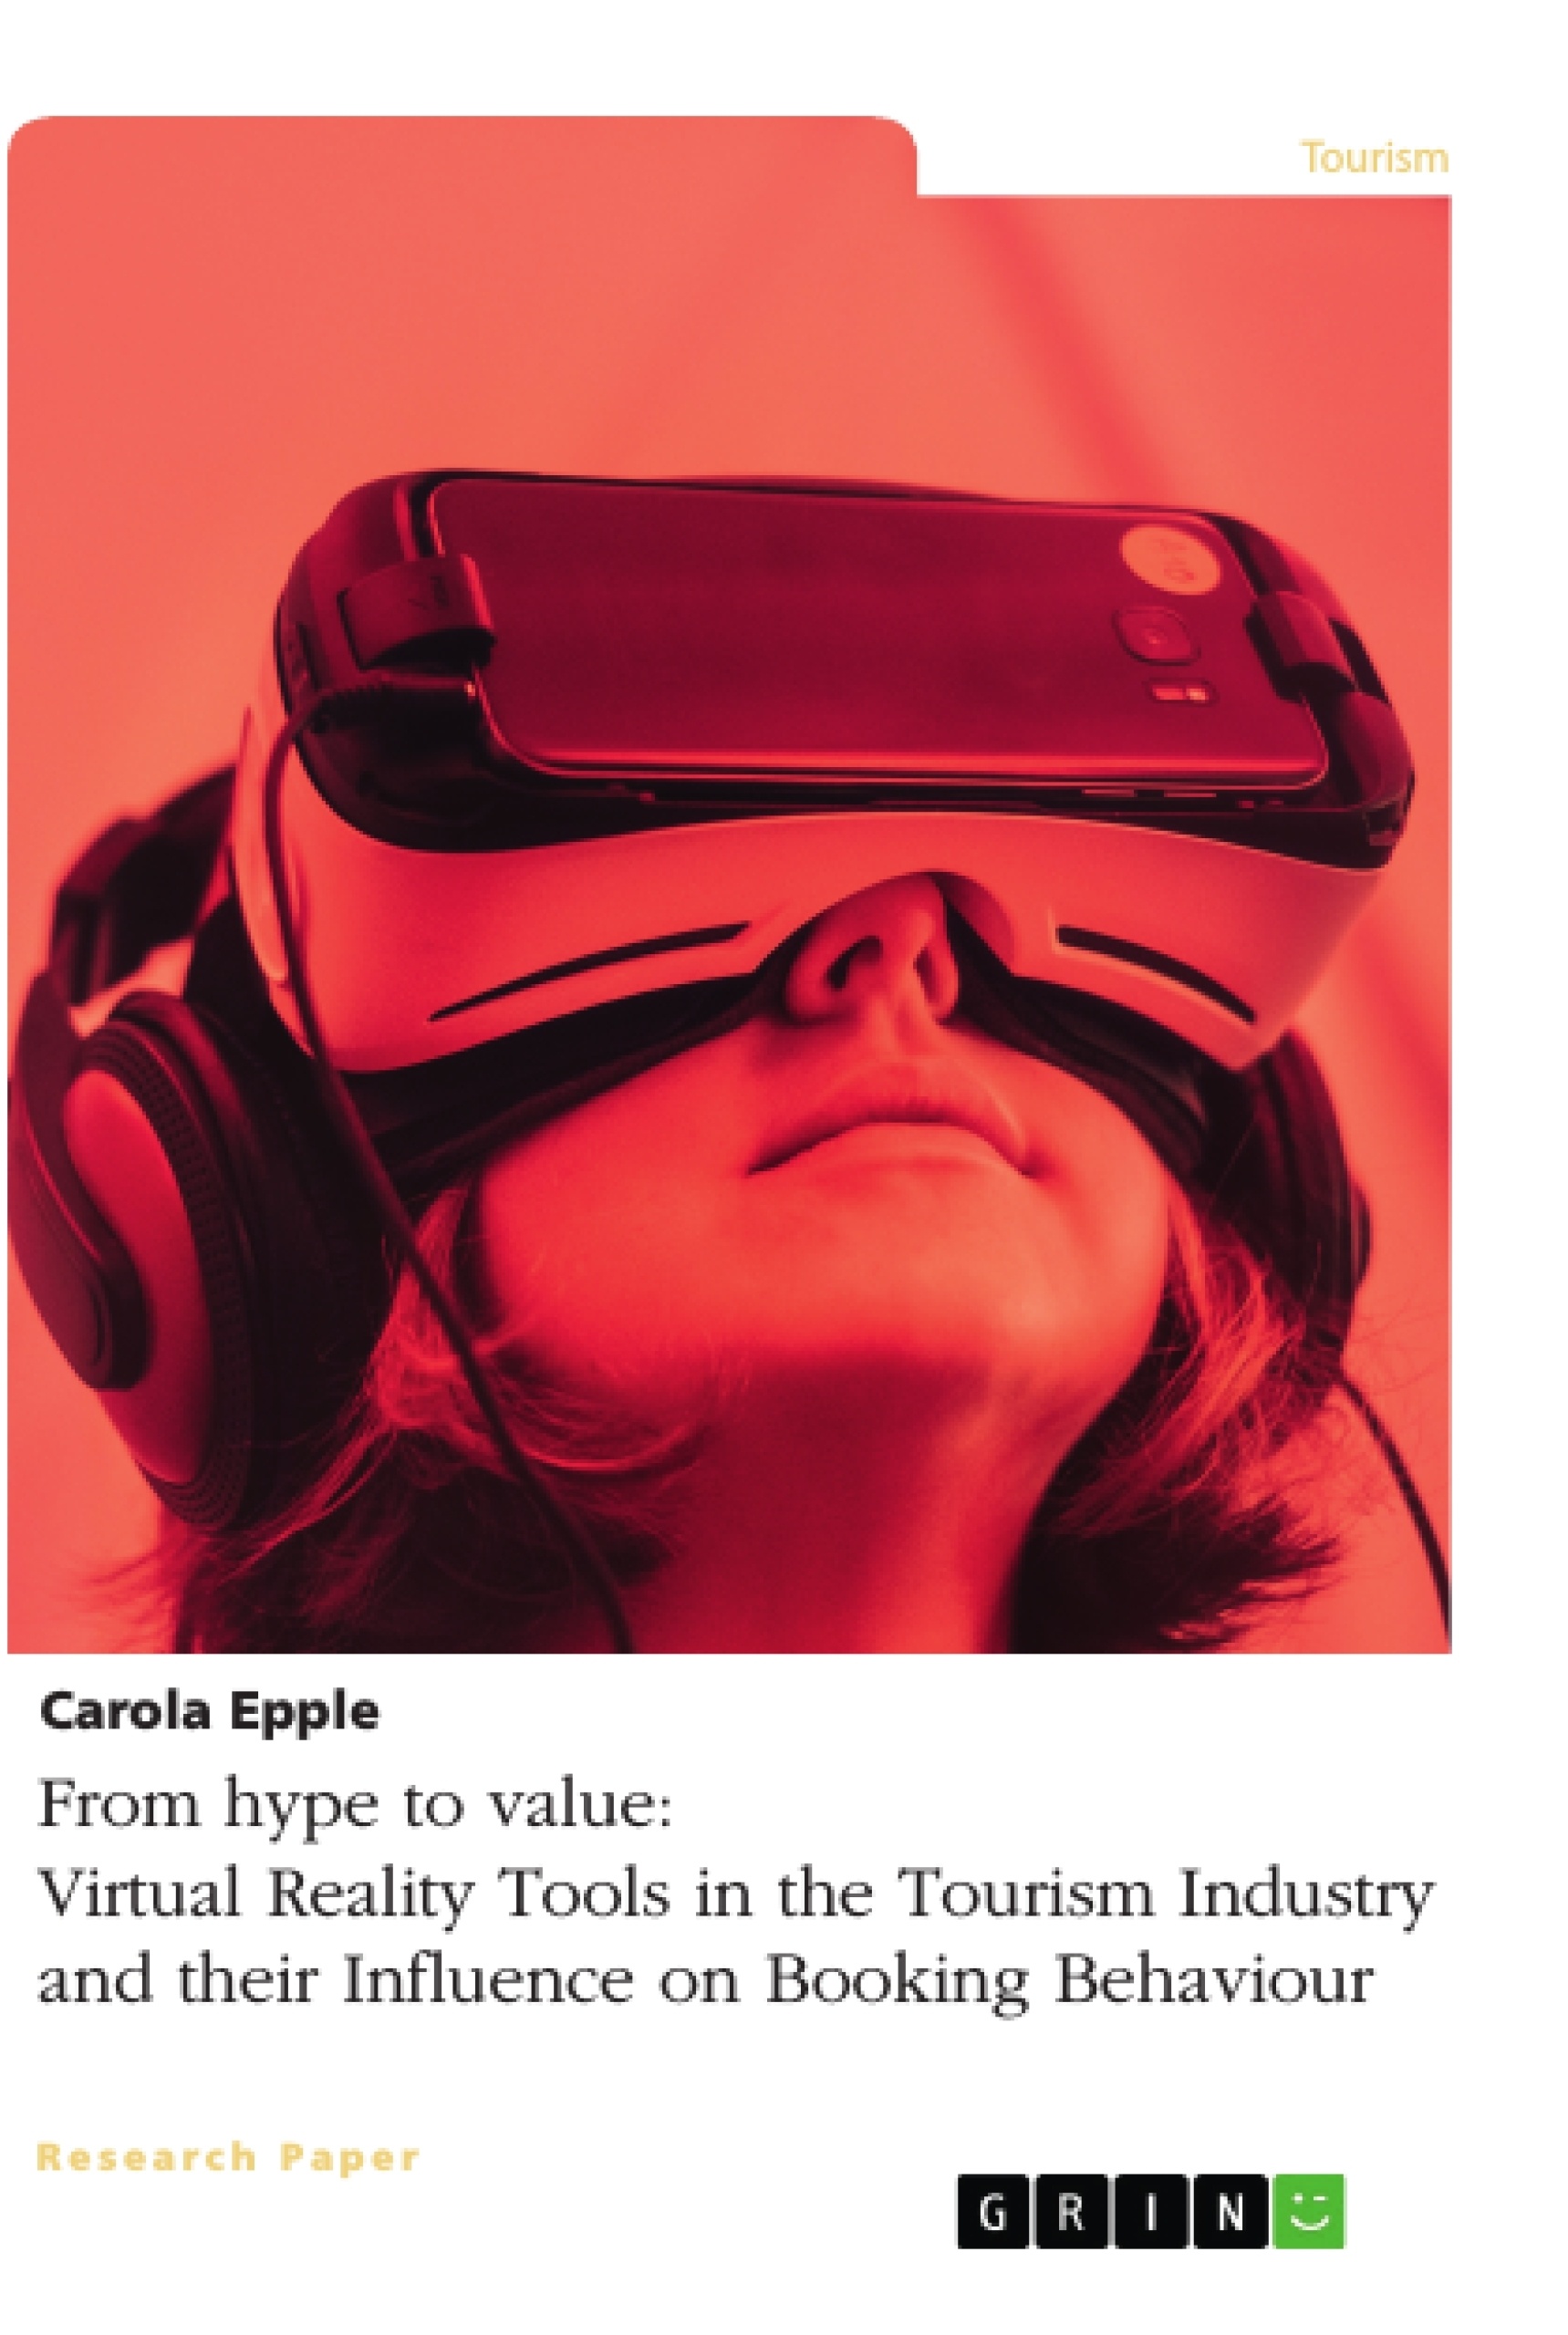 Title: From hype to value. Virtual Reality Tools in the Tourism Industry and their Influence on Booking Behaviour